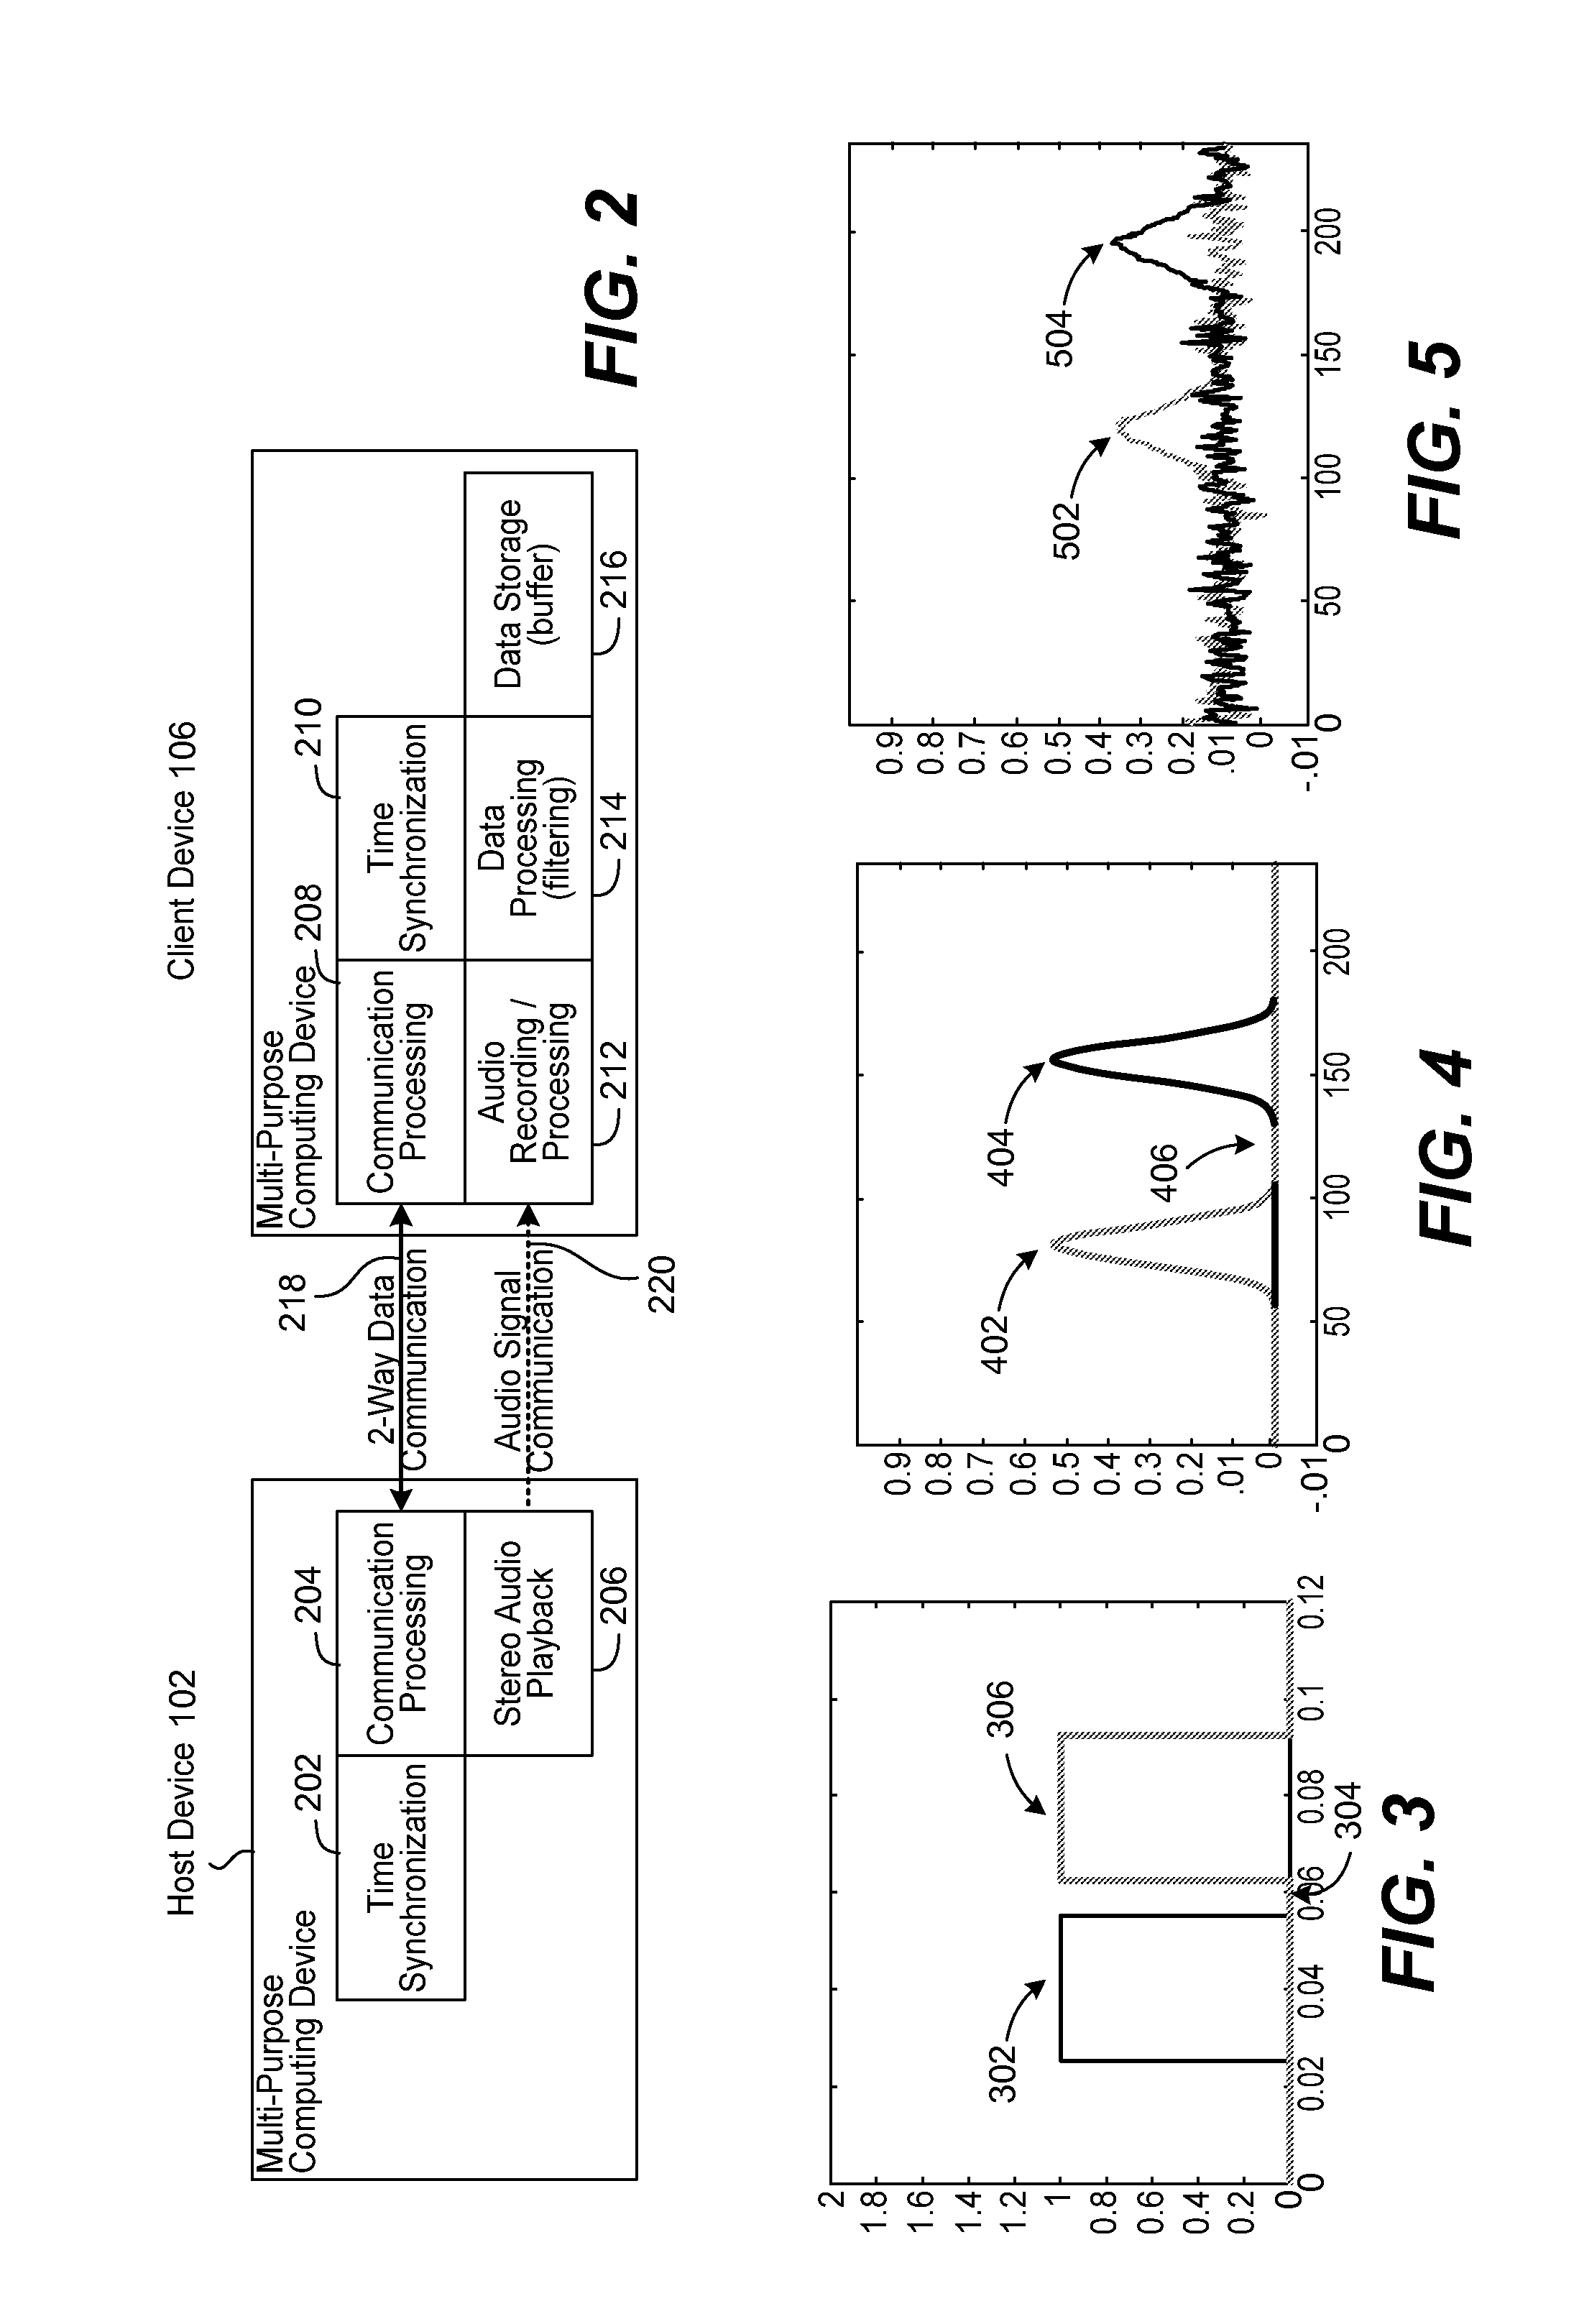 Position determination of devices using stereo audio